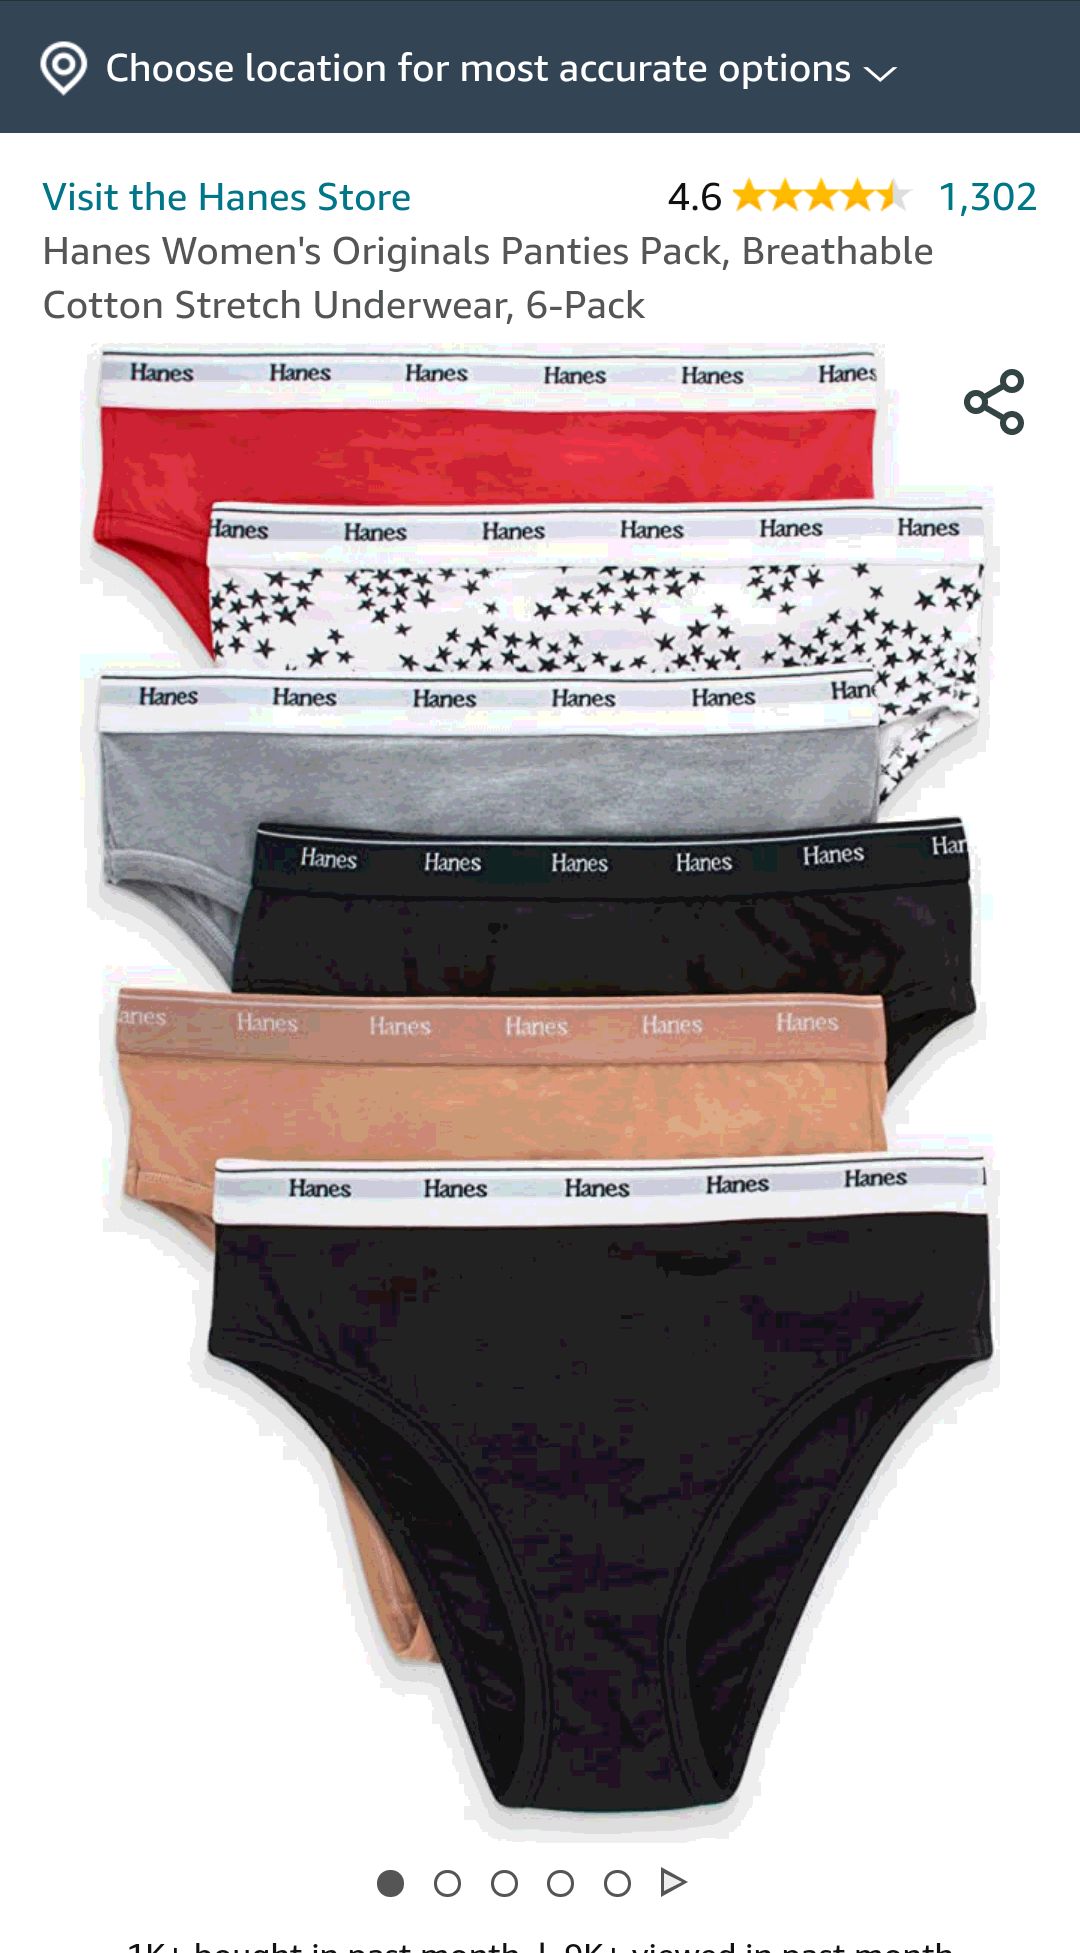 Hanes女士内裤 Women's Originals Panties Pack, Breathable Cotton Stretch Underwear, Basic Color Mix, 6-Pack Hi-Cuts, Large at Amazon Women’s Clothing store